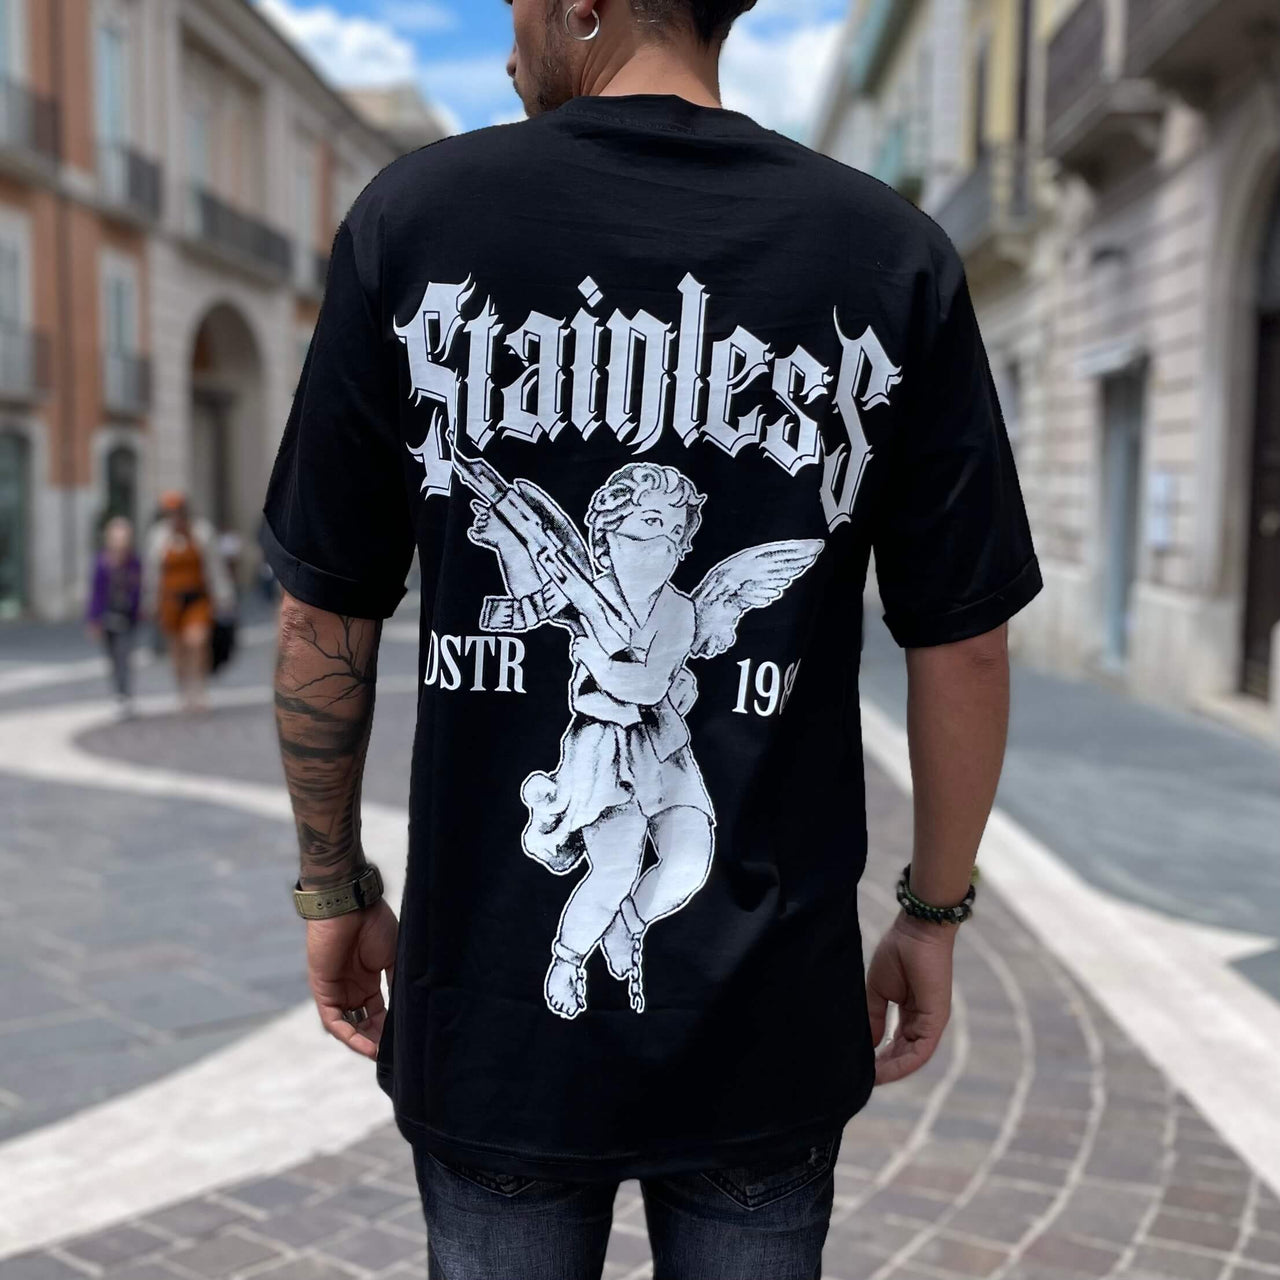 T-shirt nera stampa Stainless - FLAG STORE